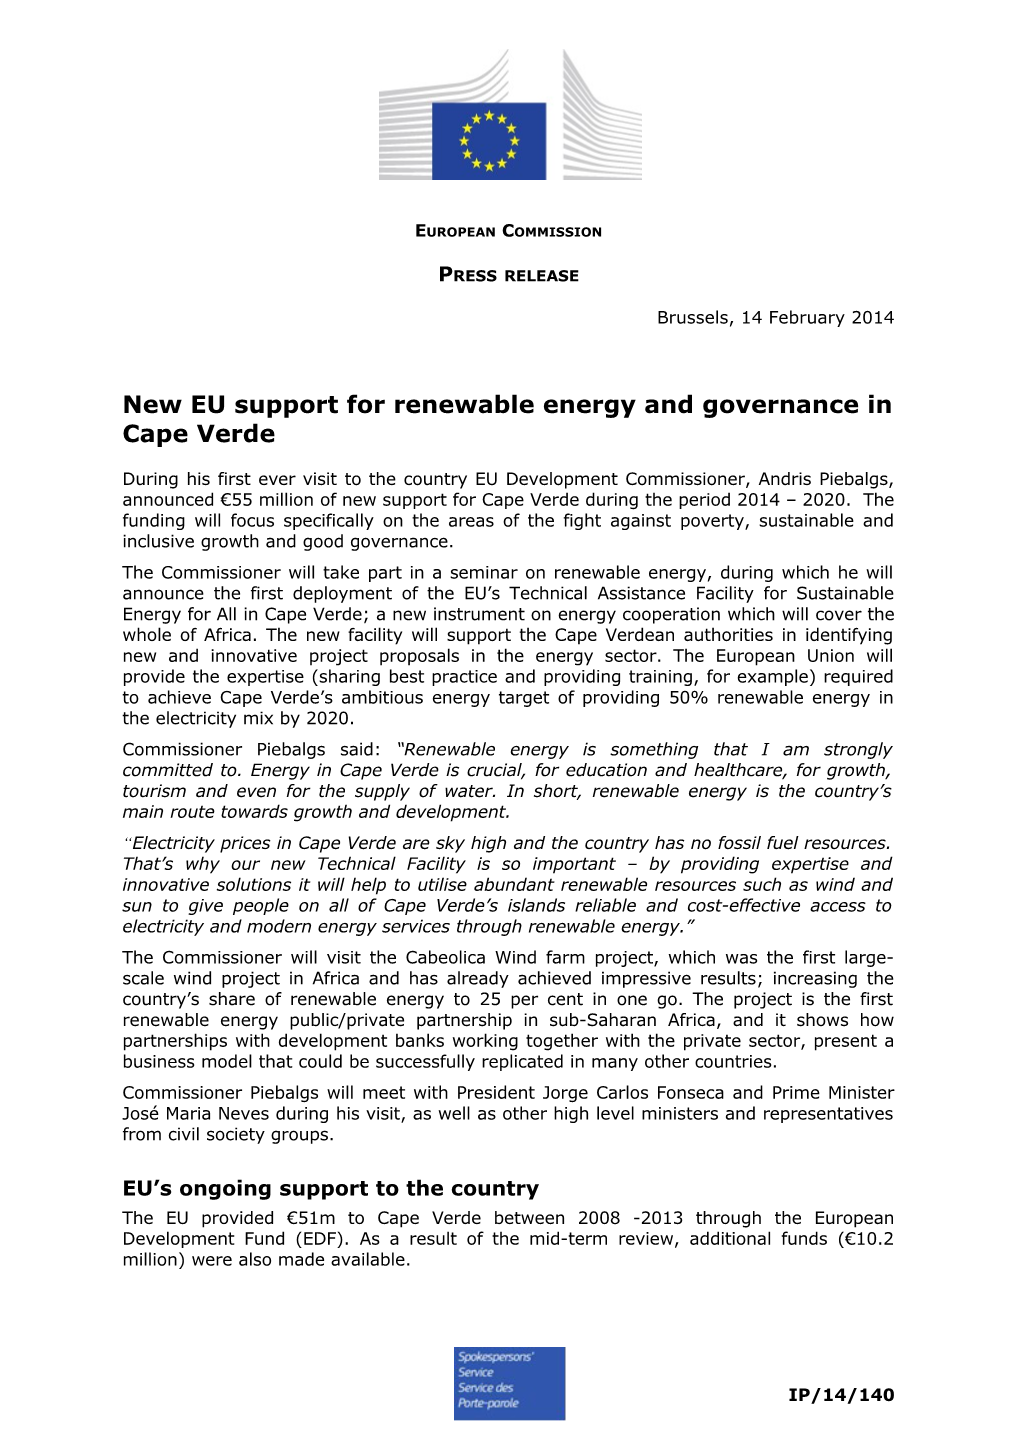 New EU Support for Renewable Energy and Governance in Cape Verde